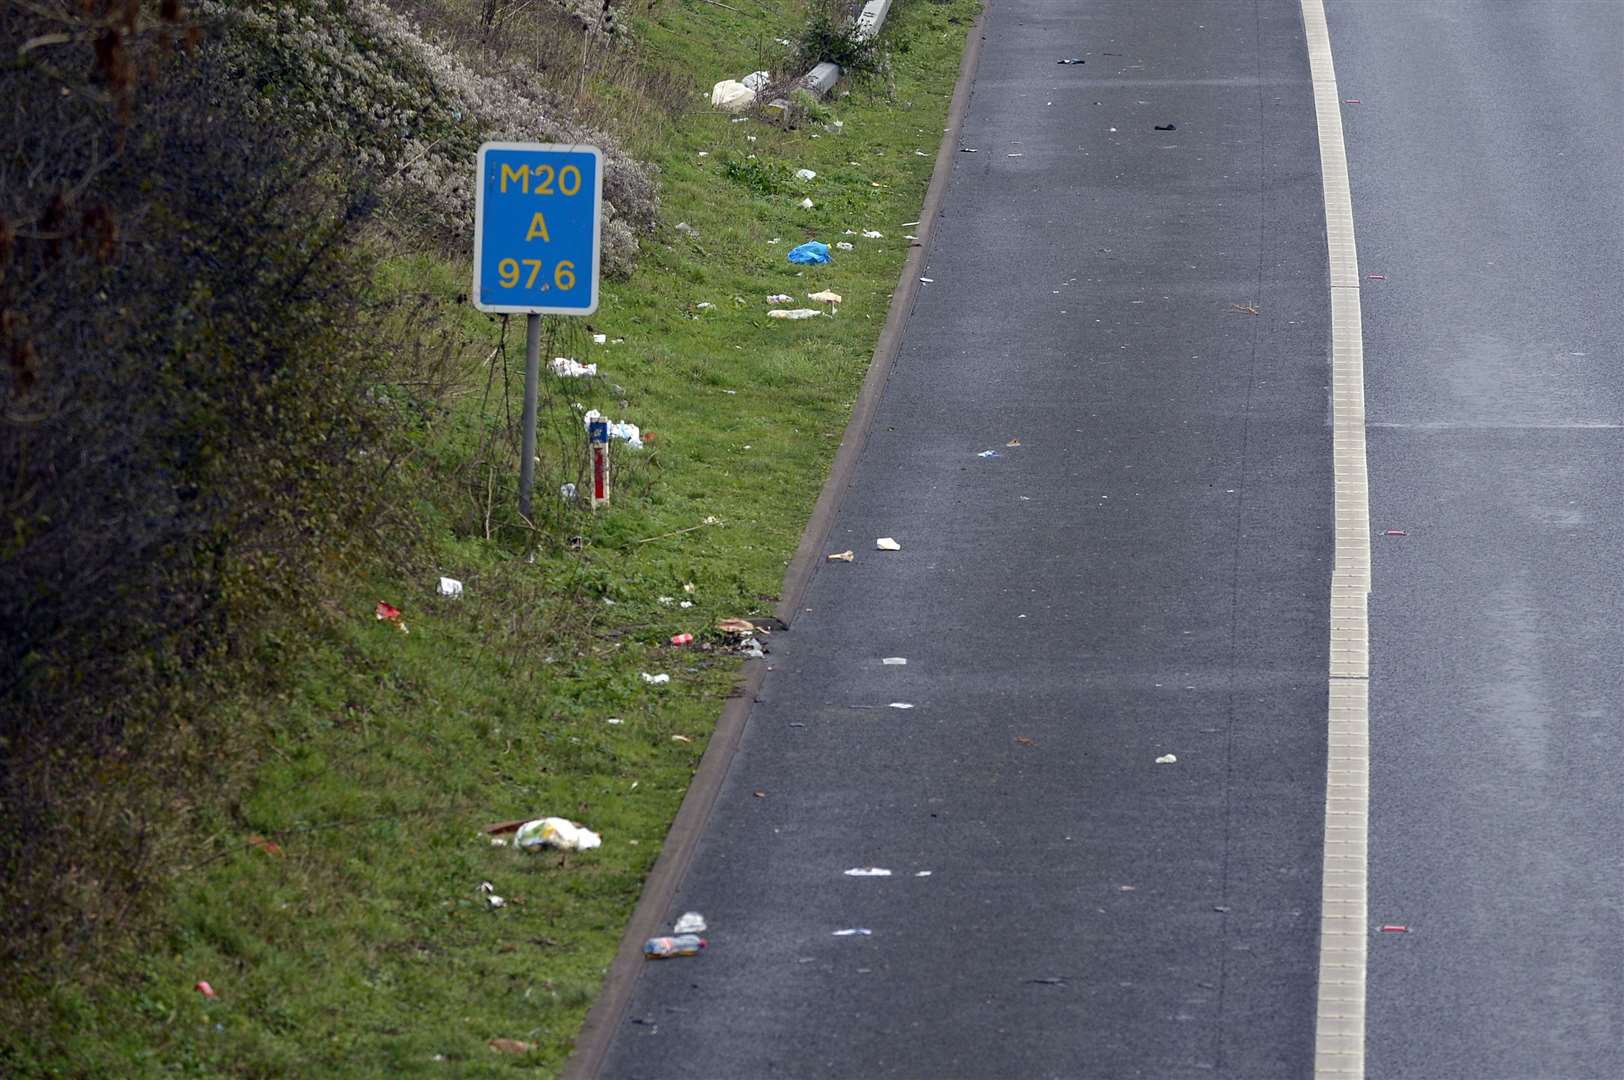 Drivers say parts of the M20 look like a "complete eye-sore". Picture: Barry Goodwin